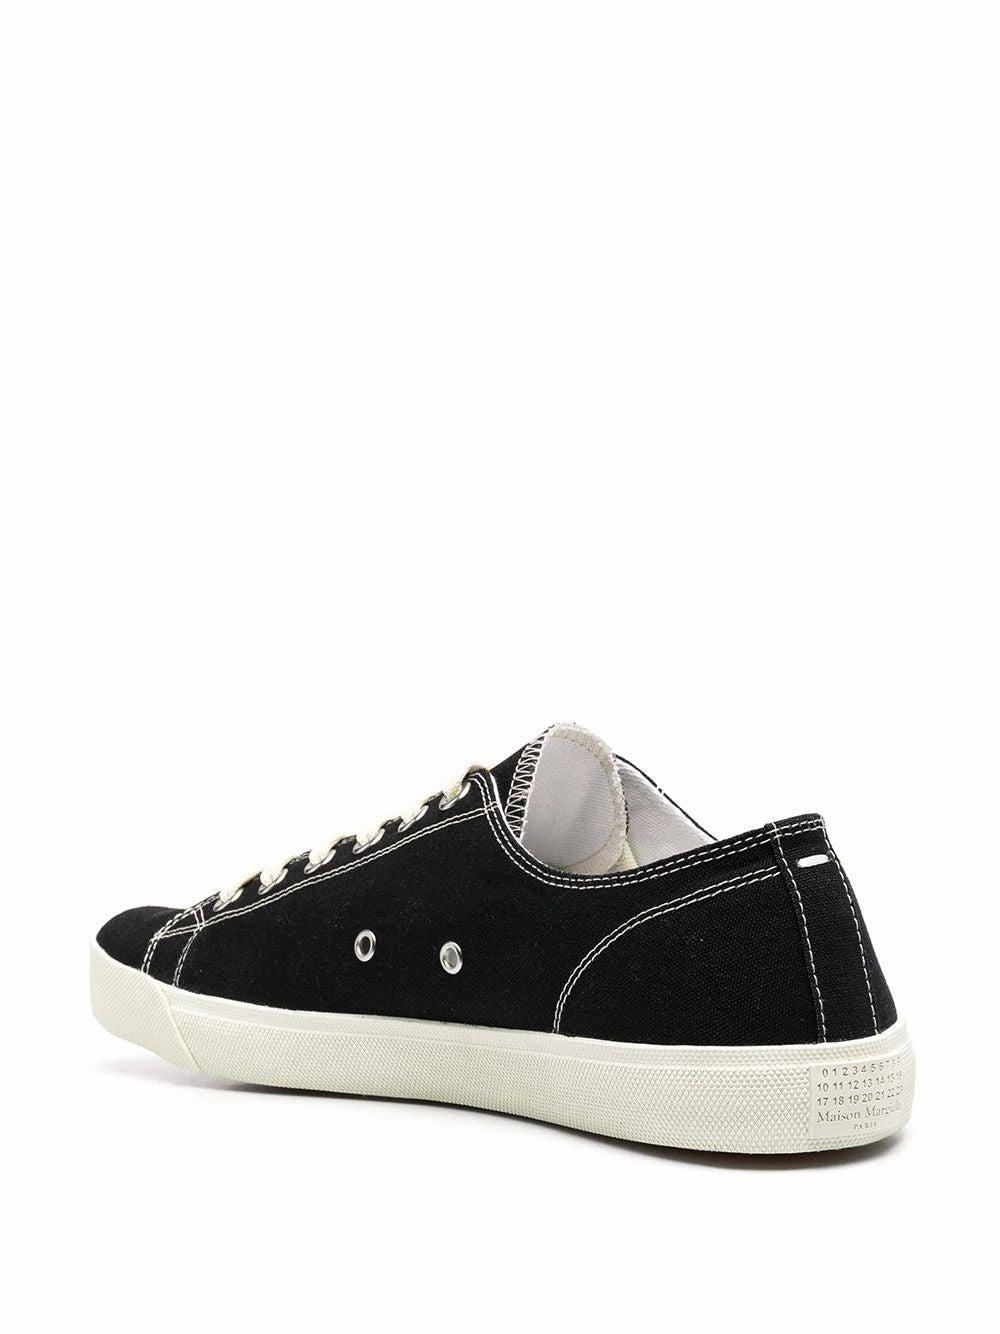 Maison Margiela Tabi Canvas Sneakers in Black for Men - Save 54 